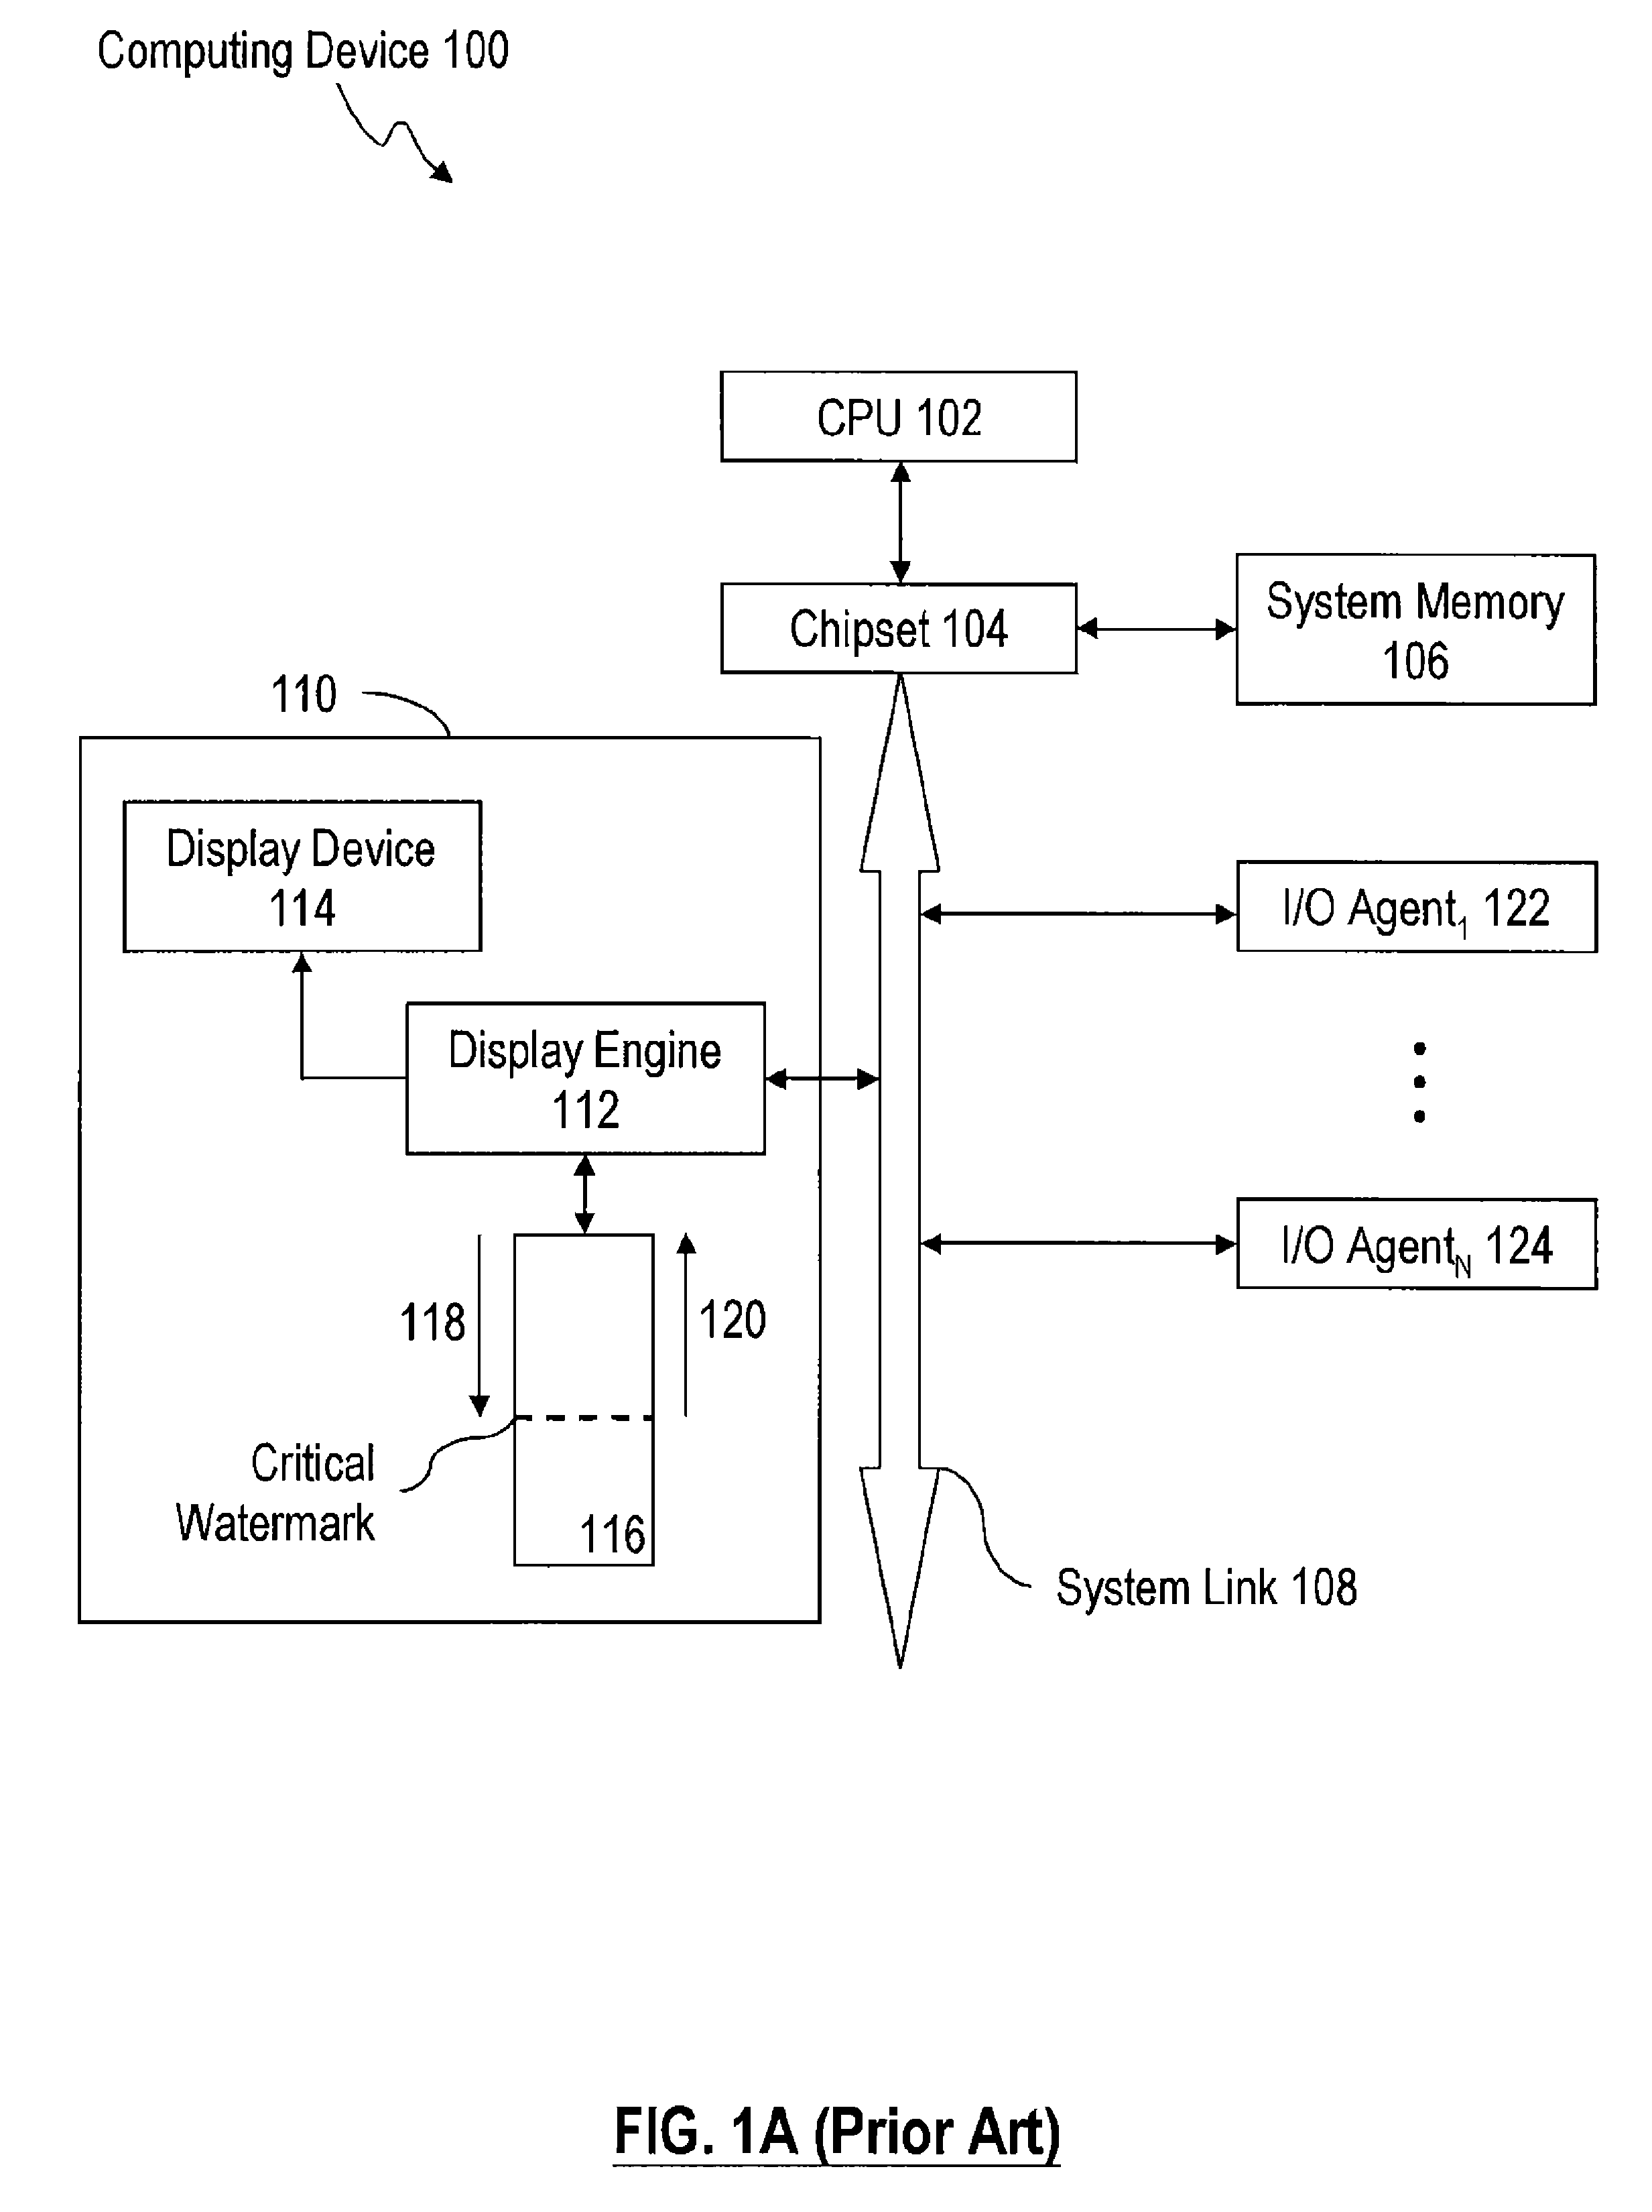 Method and system for implementing generalized system stutter